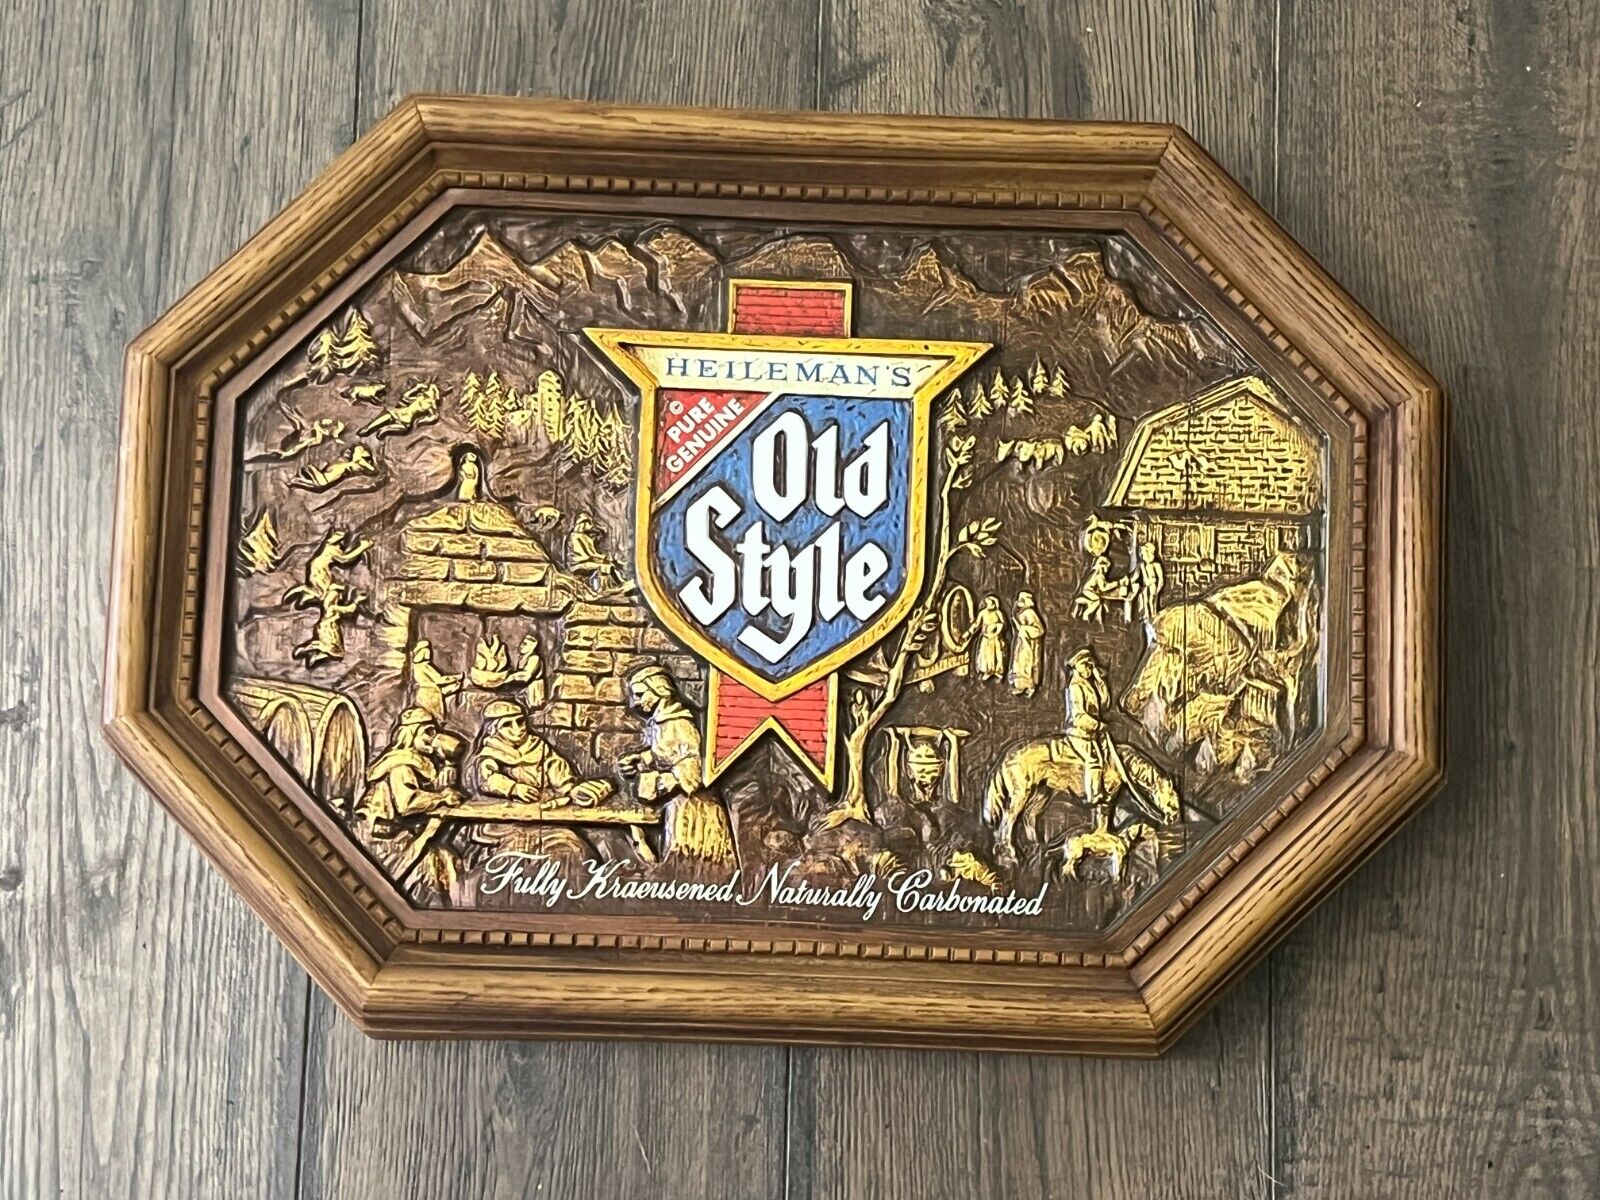 Vintage Heileman’s OLD STYLE Plastic beer Woodcarving Octogon Advertising Sign